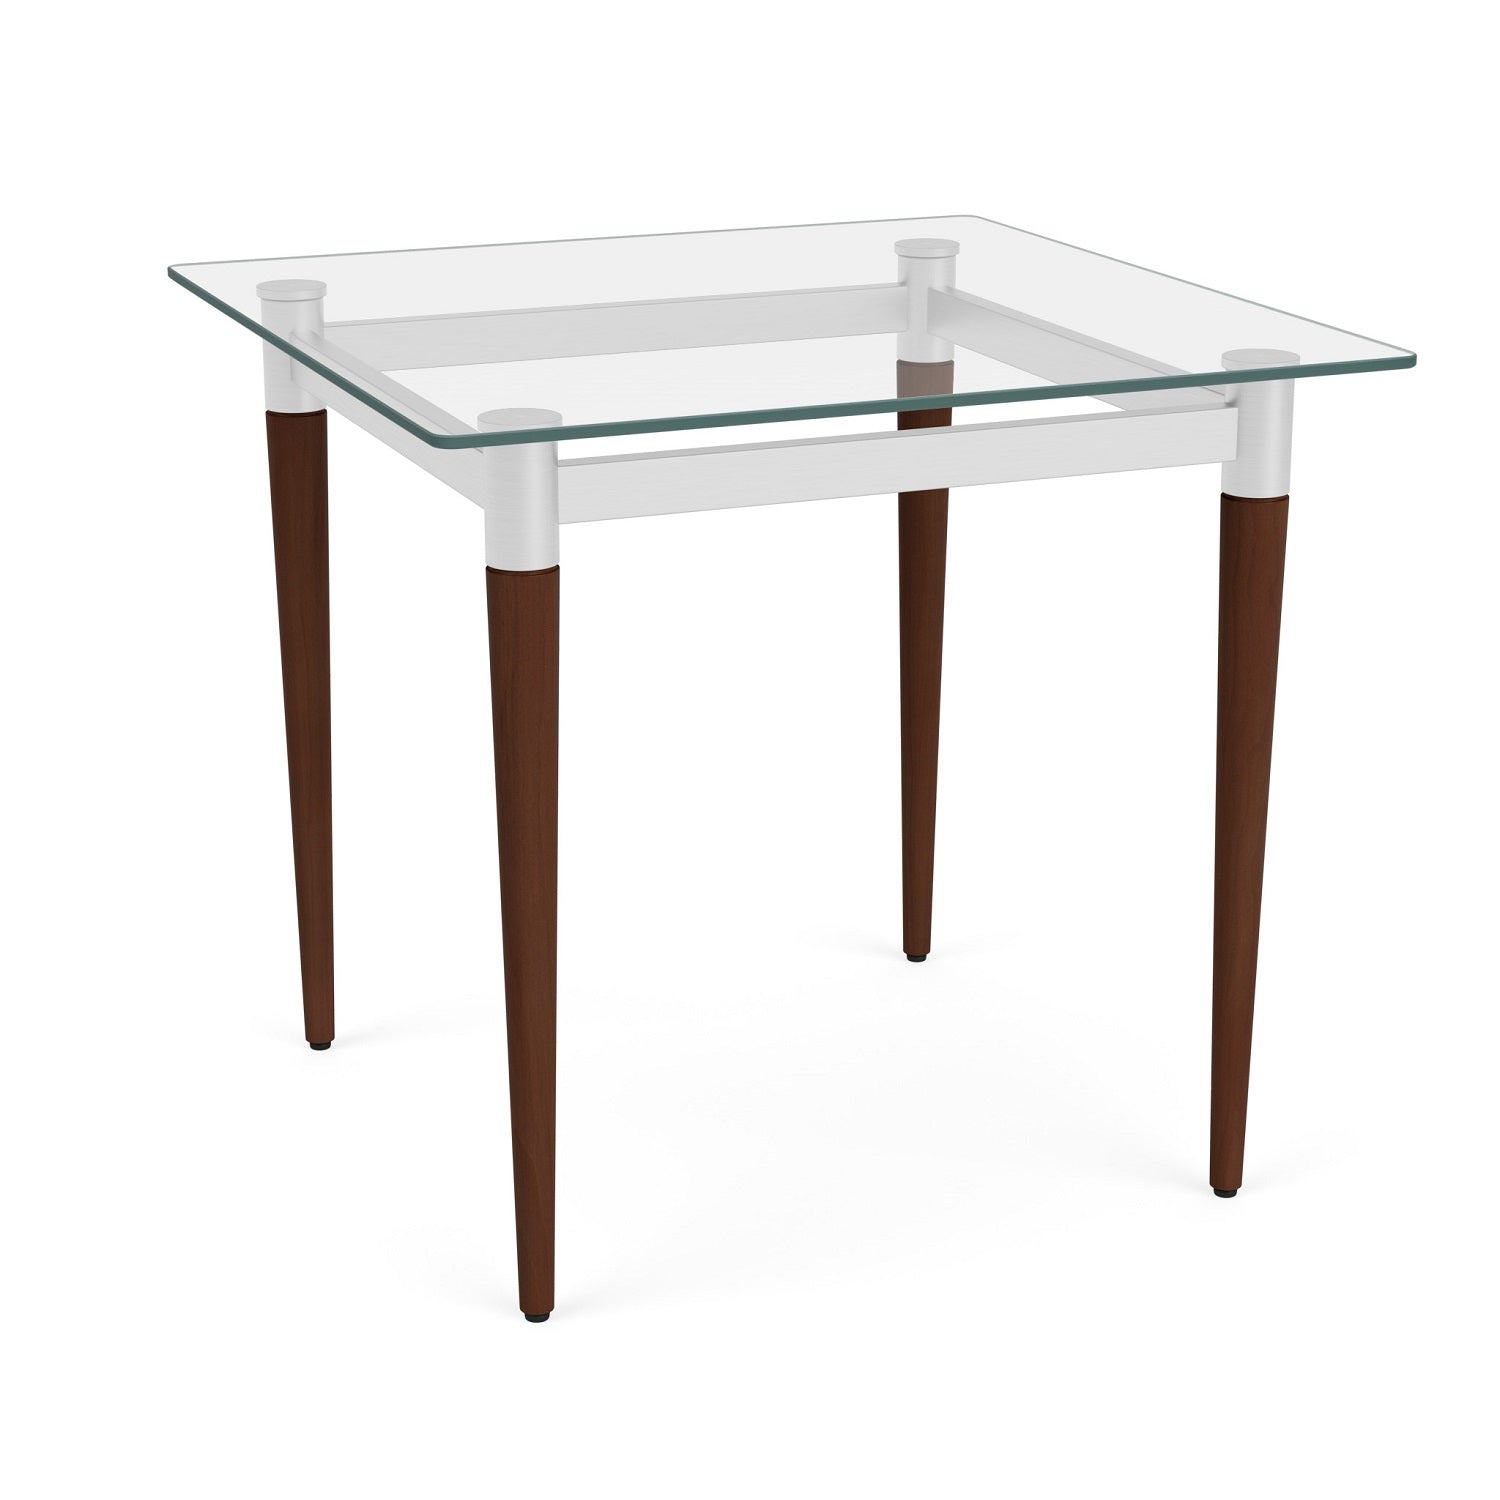 Siena Collection End Table with Glass Top, FREE SHIPPING